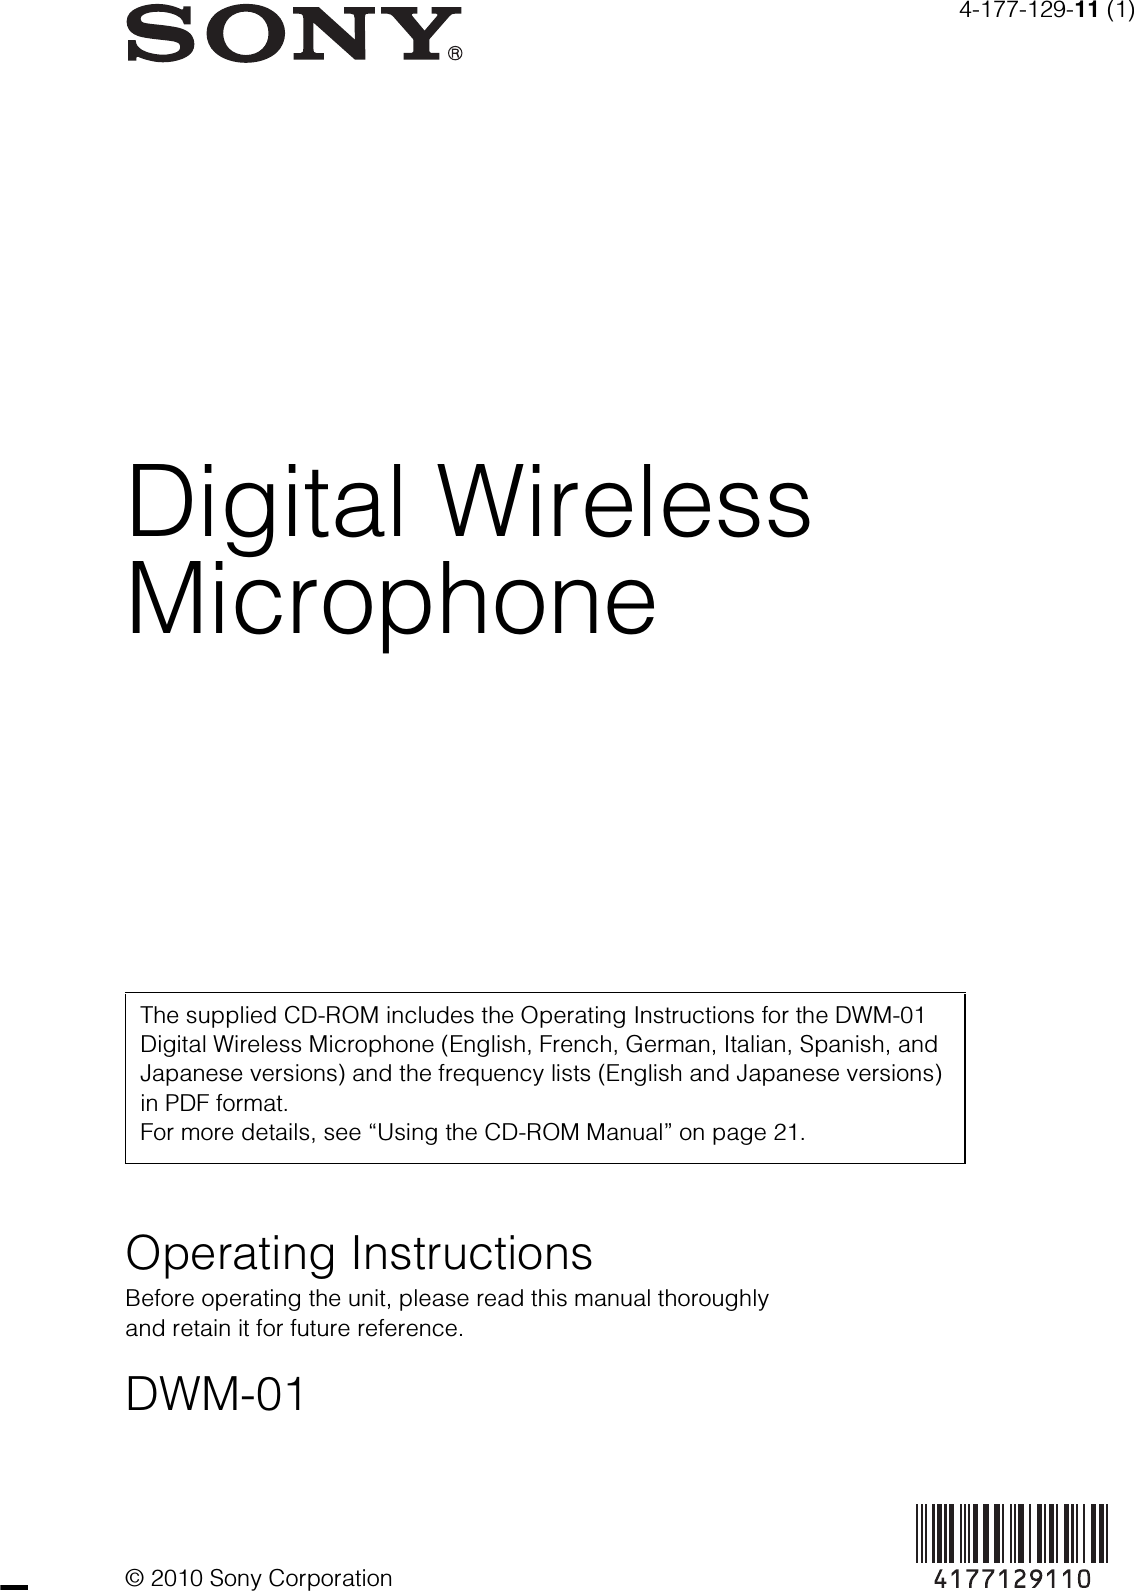 4-177-129-11 (1)© 2010 Sony CorporationDigital WirelessMicrophoneOperating InstructionsBefore operating the unit, please read this manual thoroughly and retain it for future reference.DWM-01The supplied CD-ROM includes the Operating Instructions for the DWM-01 Digital Wireless Microphone (English, French, German, Italian, Spanish, and Japanese versions) and the frequency lists (English and Japanese versions) in PDF format. For more details, see “Using the CD-ROM Manual” on page 21.